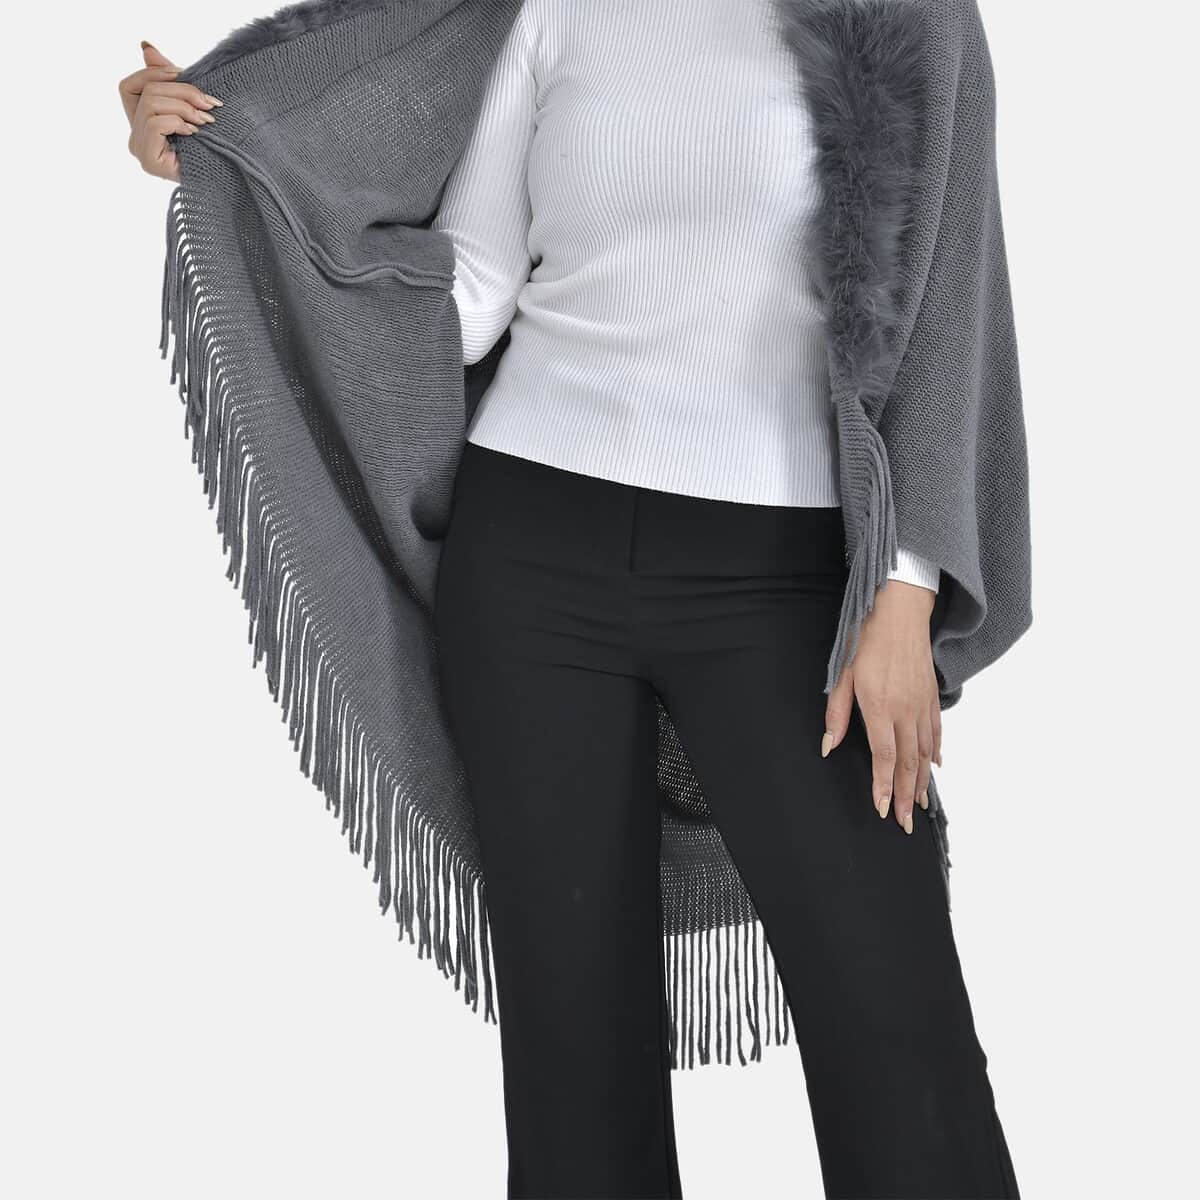 Tamsy Charcoal Trendy and Luxurious Faux Fur Trimmed Kimono with Fringes - One Size Fits Most image number 6